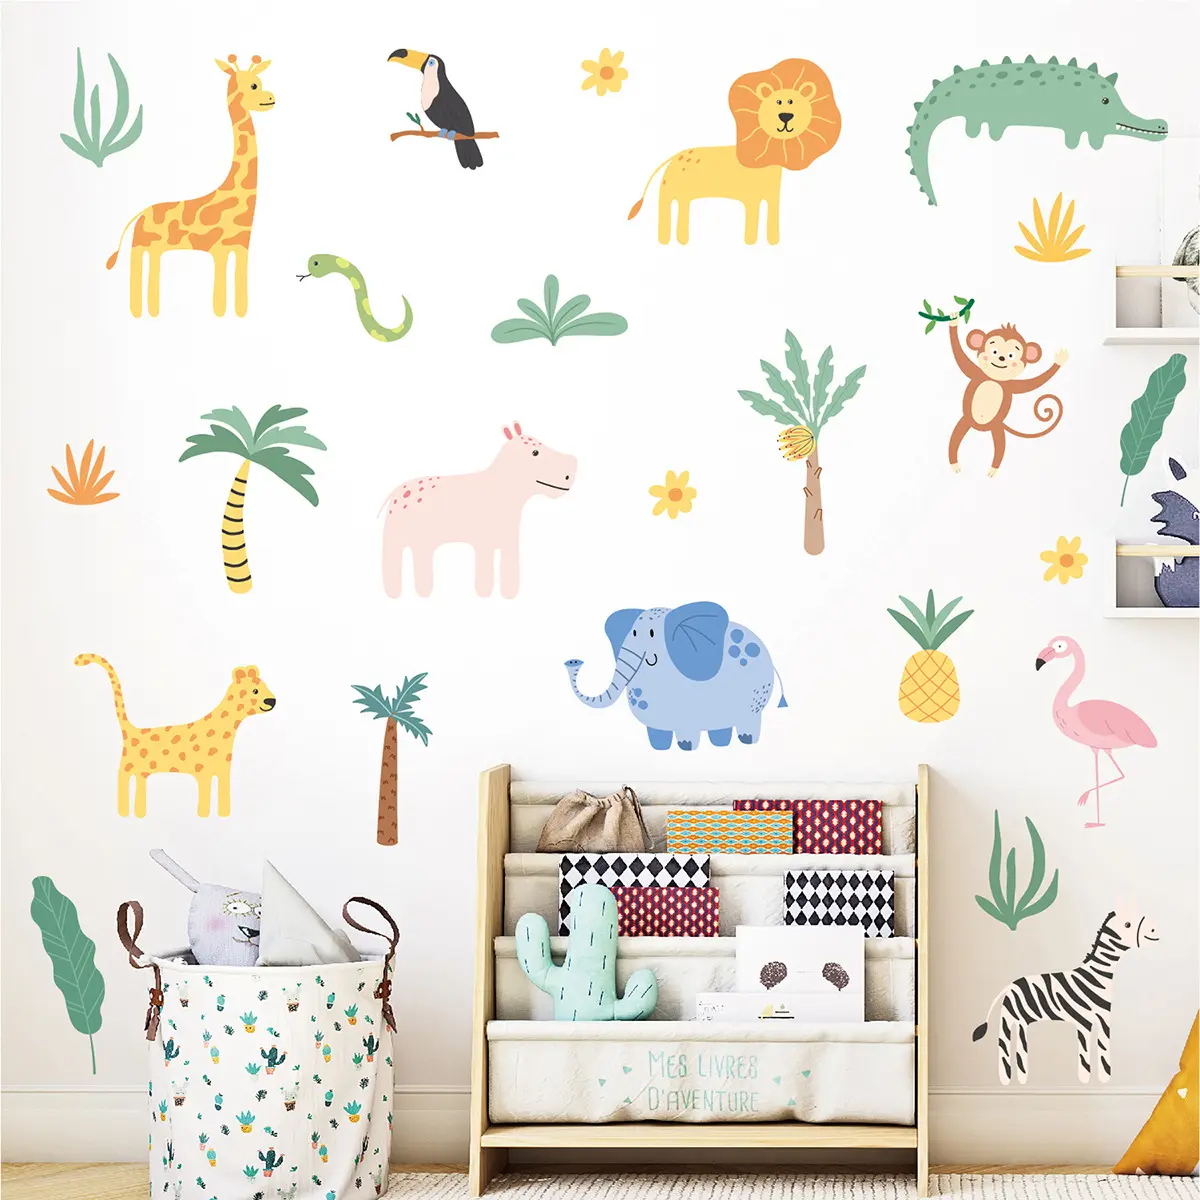 Jungle Animals Wall Decals, Cartoon Animals Wall Stickers for Kids Room ,Decorative Self Adhesive Waterproof Home Wall Stickers